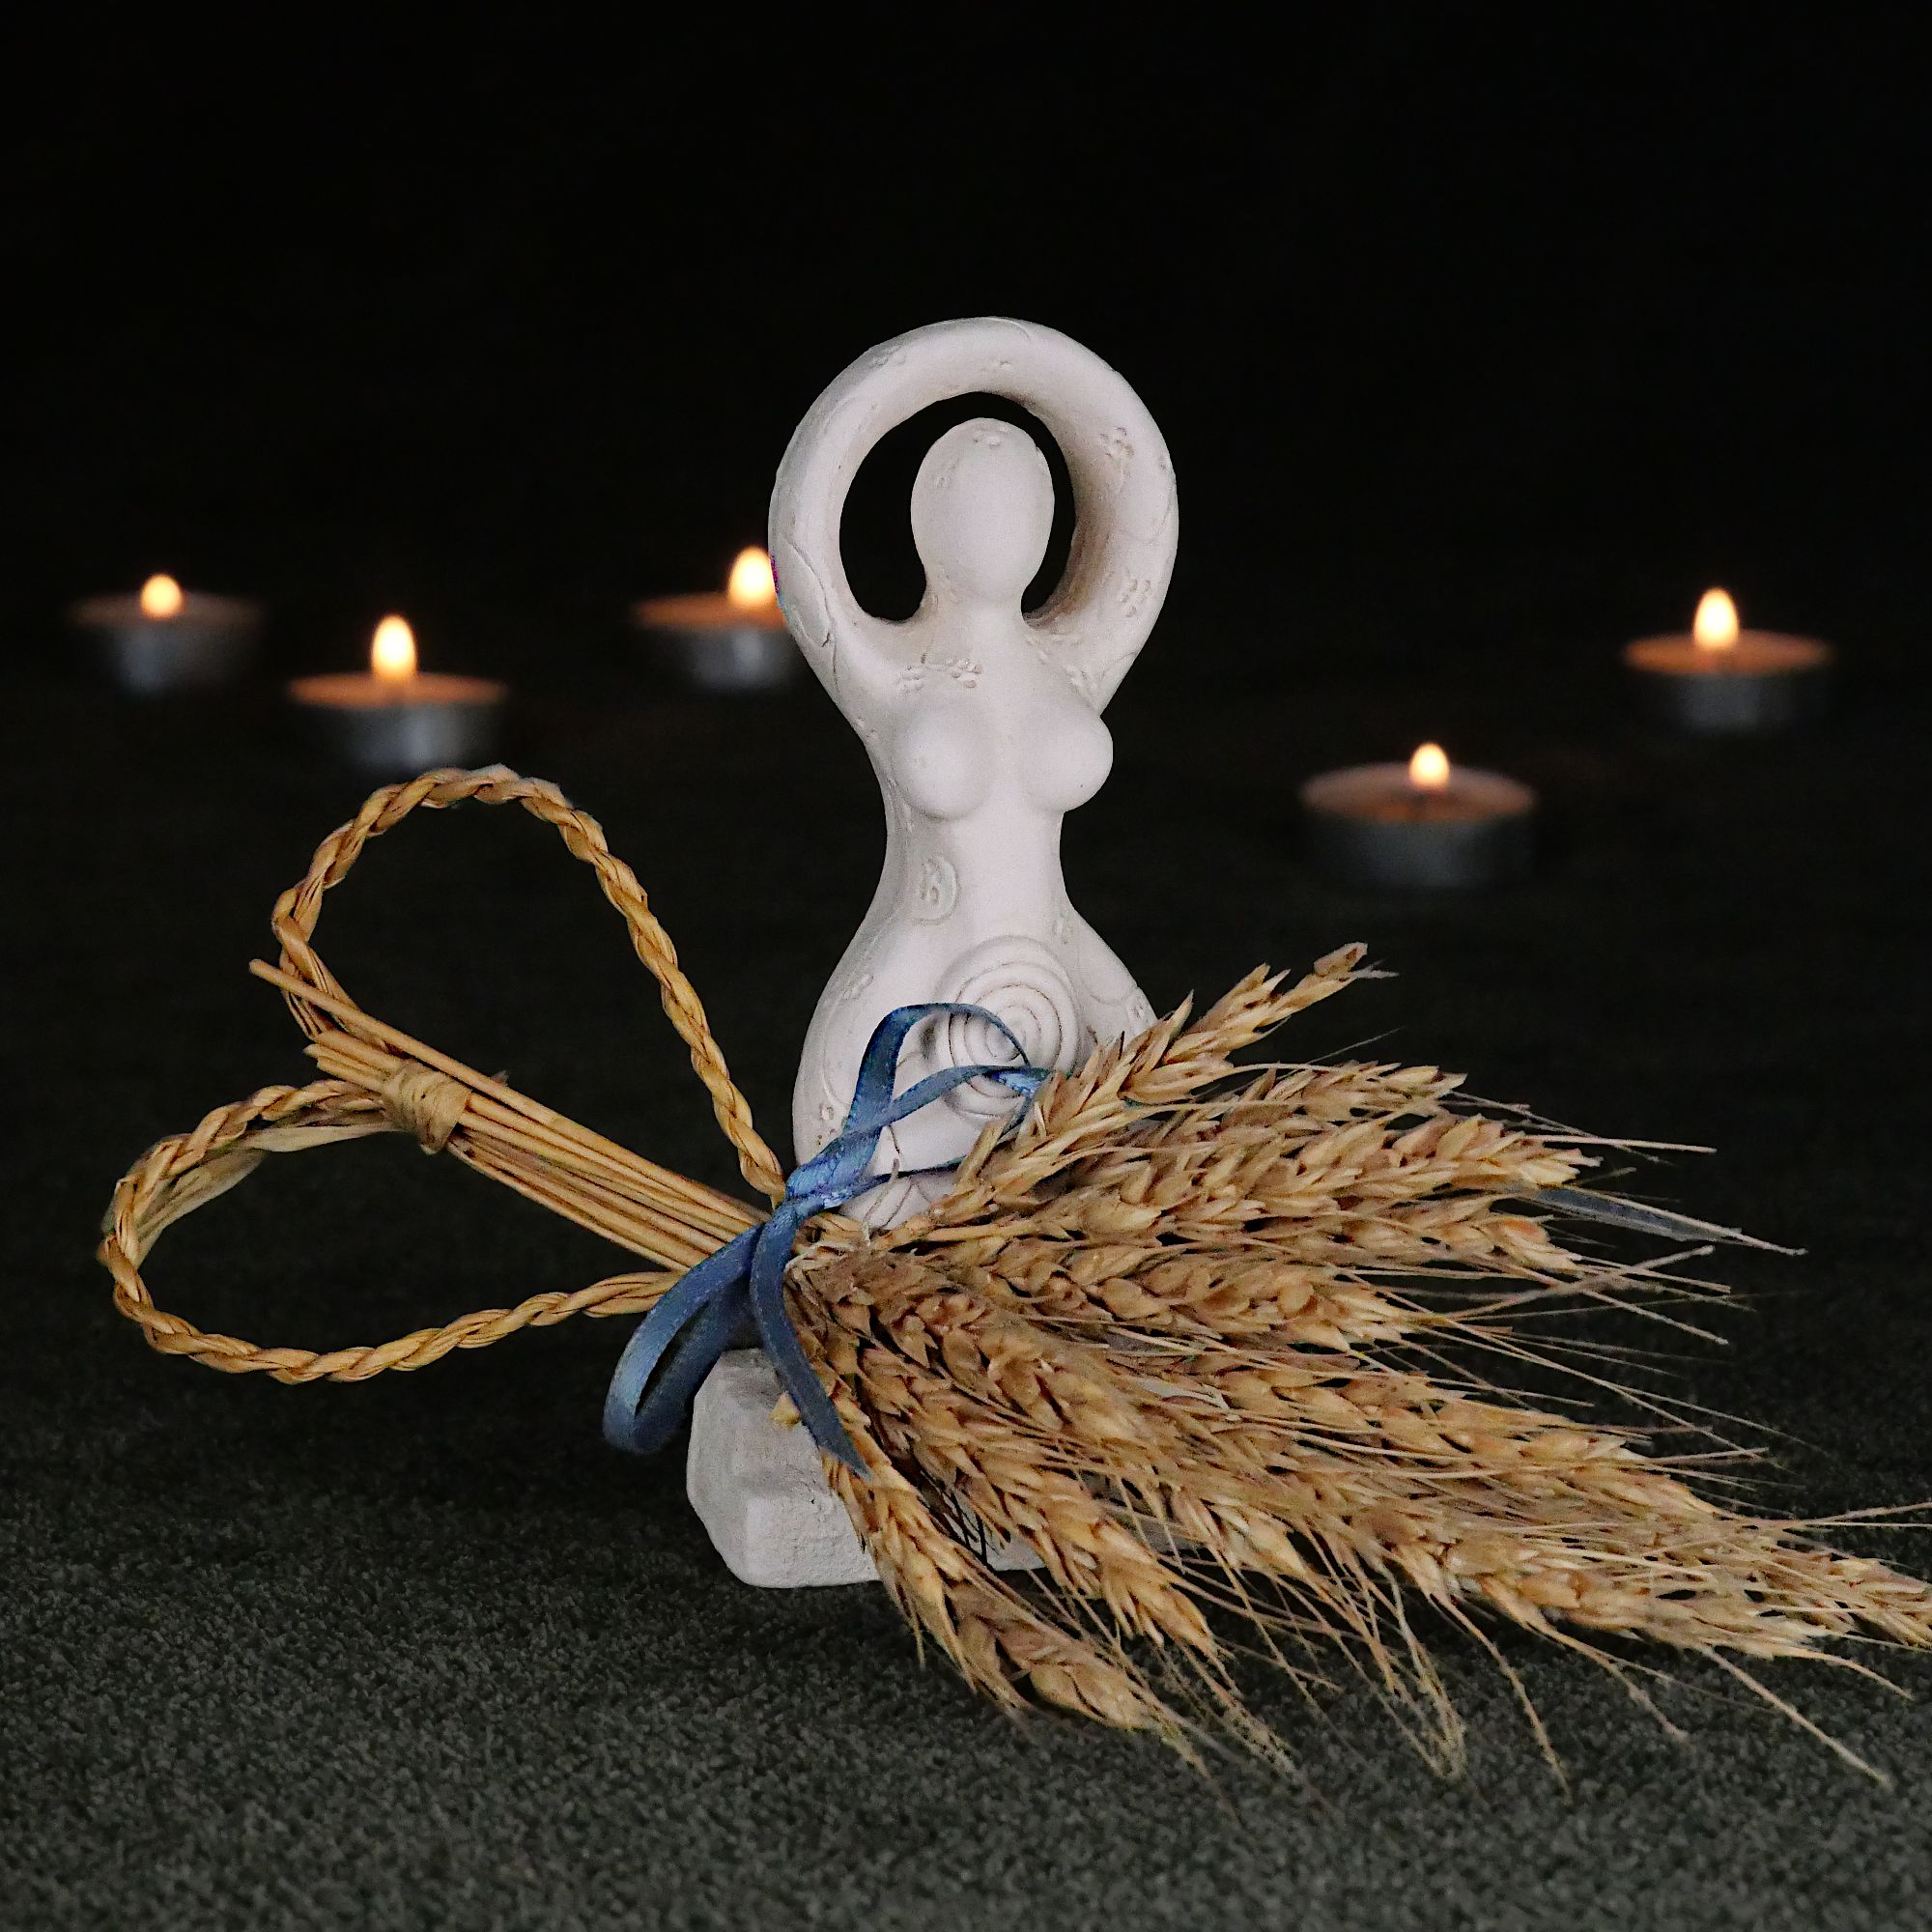 What Is Imbolc? Embracing the Promise of Spring